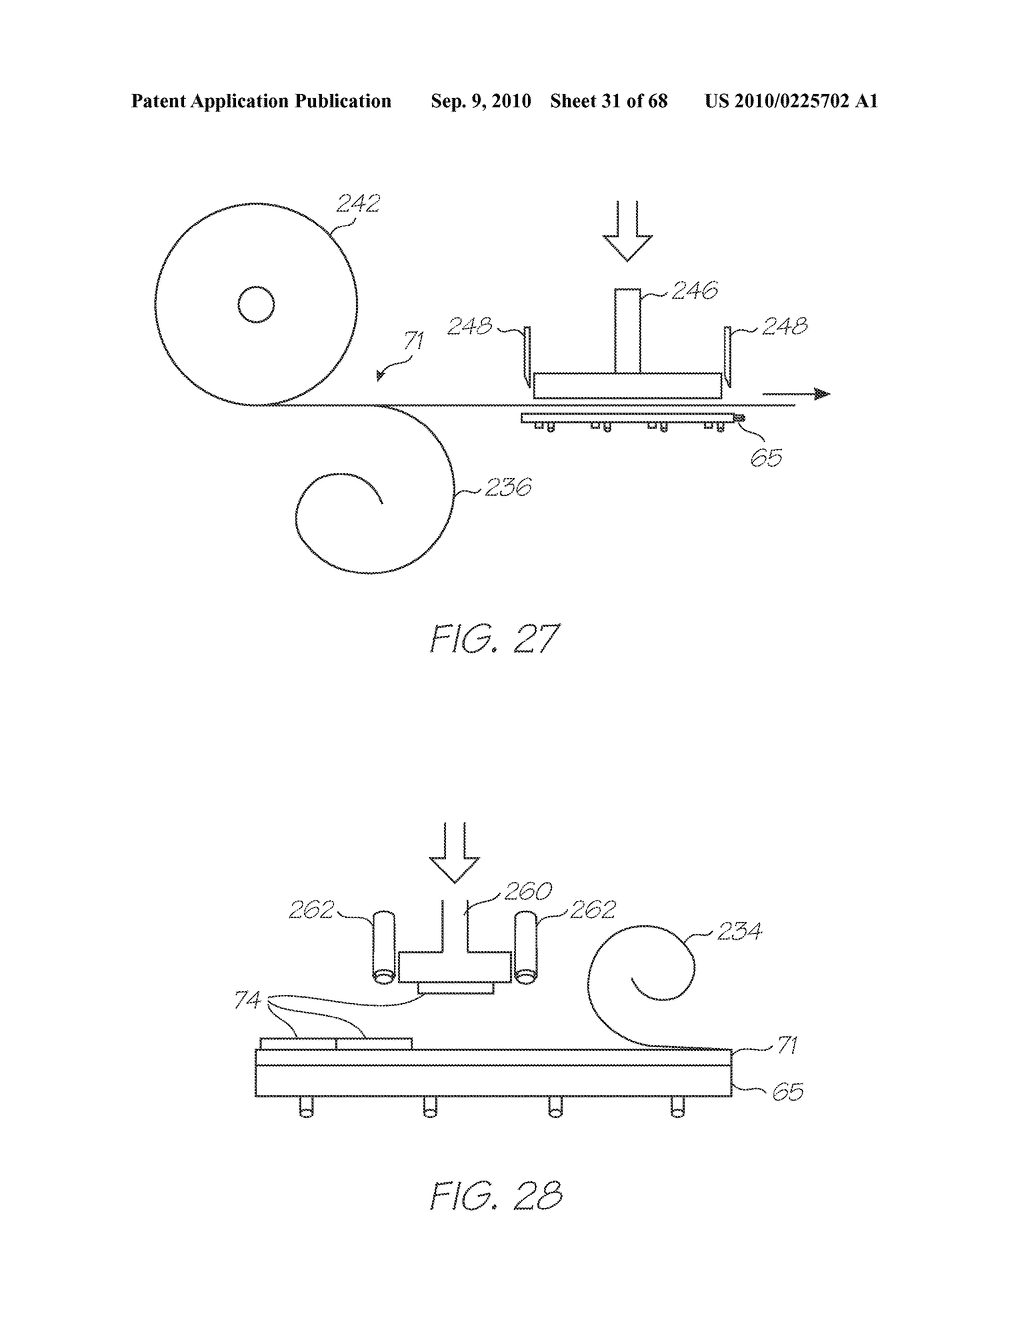 Printhead Assembly Incorporating Plural Printhead Integrated Circuits Sealed To Support Member With Polymer Sealing Film - diagram, schematic, and image 32